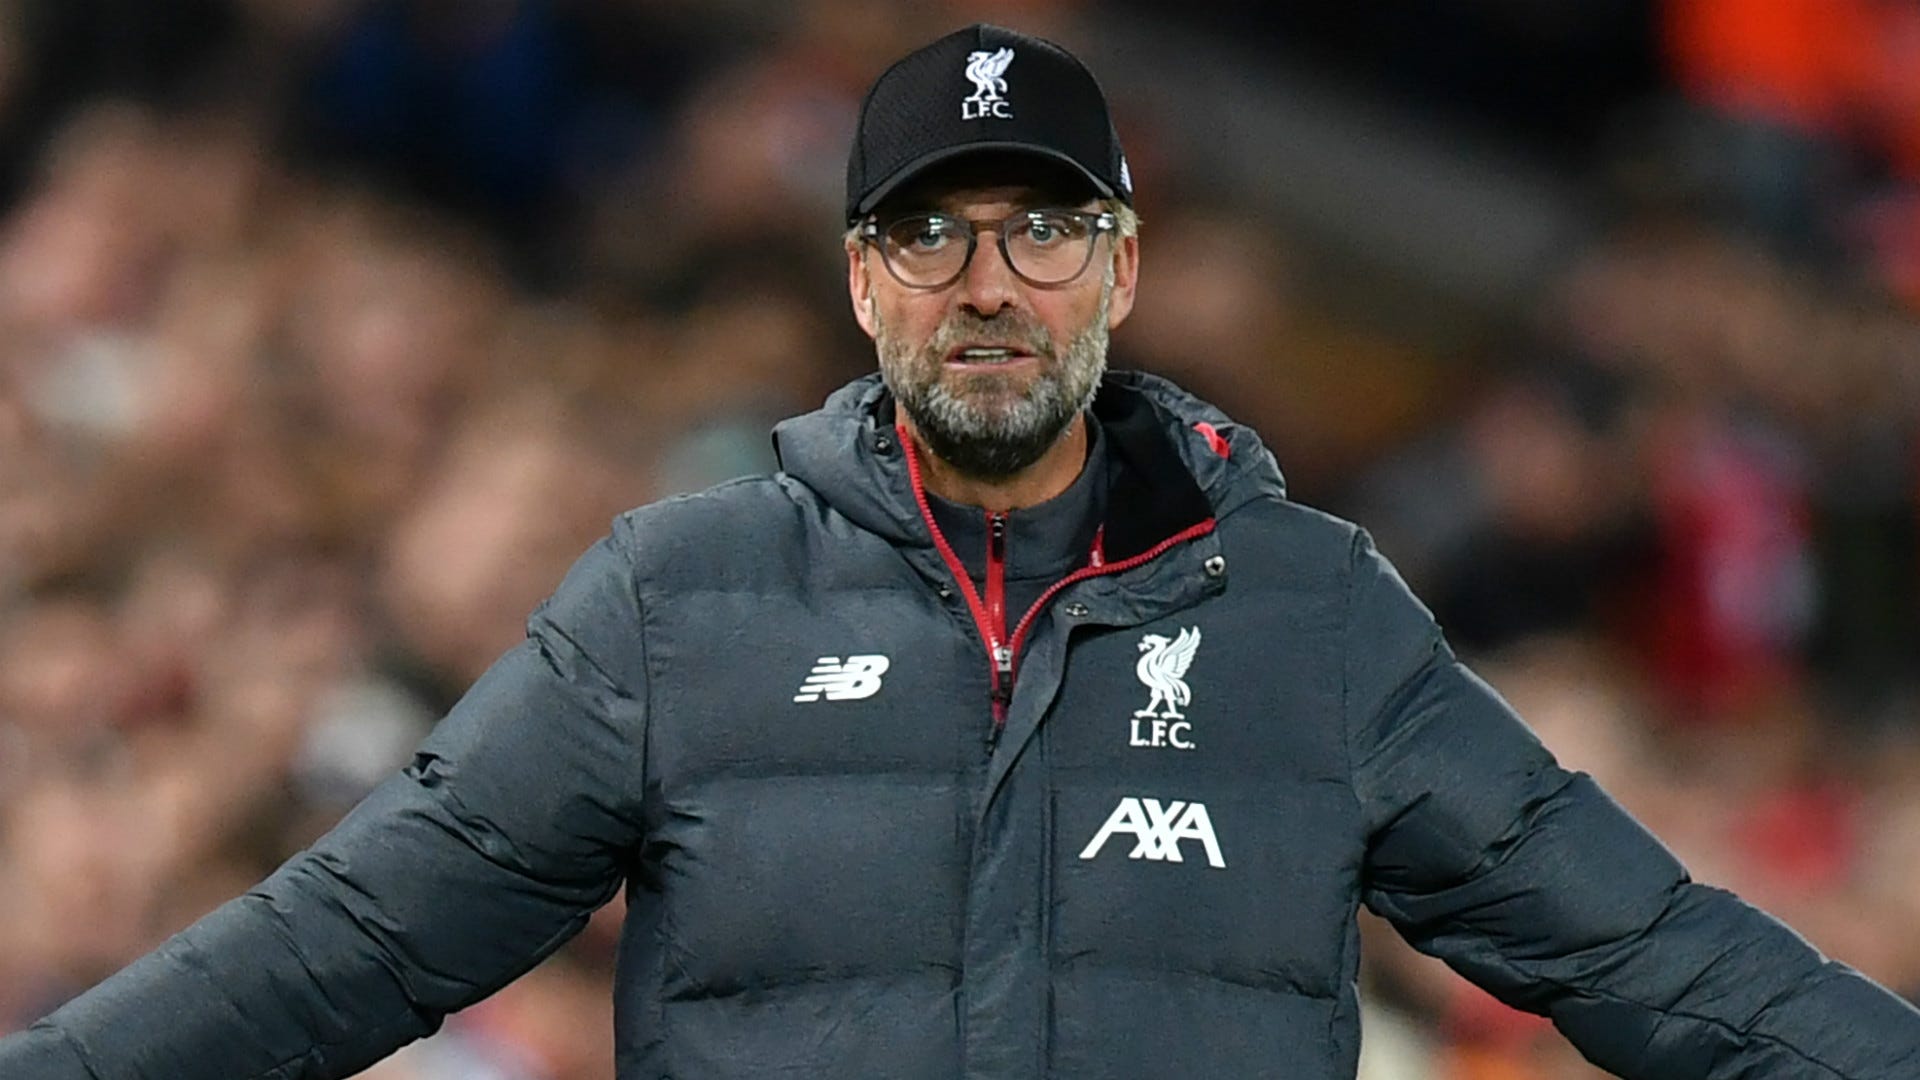 ‘If Klopp were Man Utd boss things would be different’ – World-class boss separates rivals, says Carragher